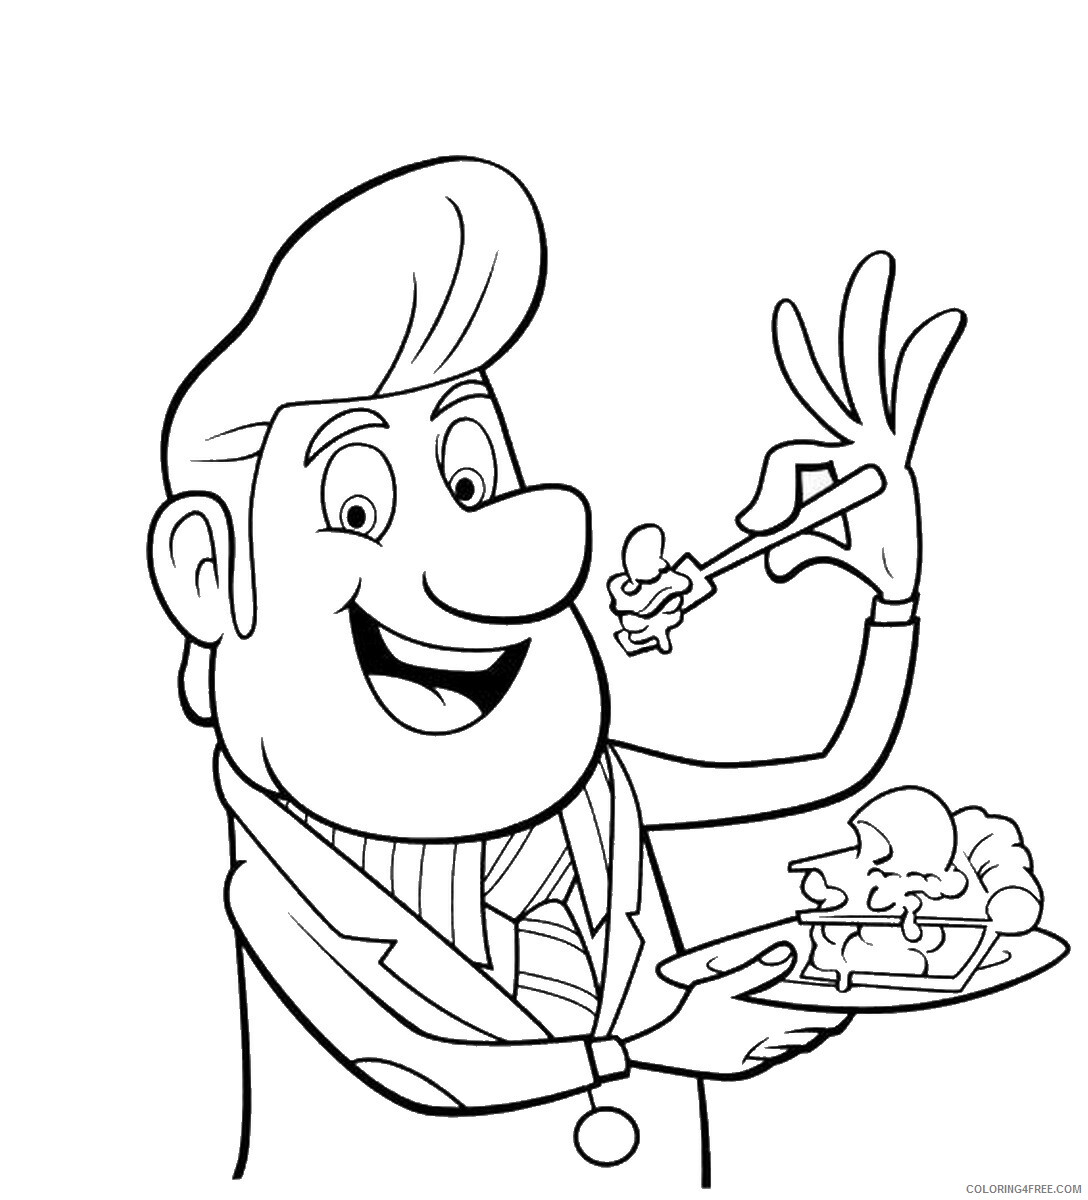 Cloudy with a Chance of Meatballs Coloring Pages TV Film Printable 2020 02227 Coloring4free